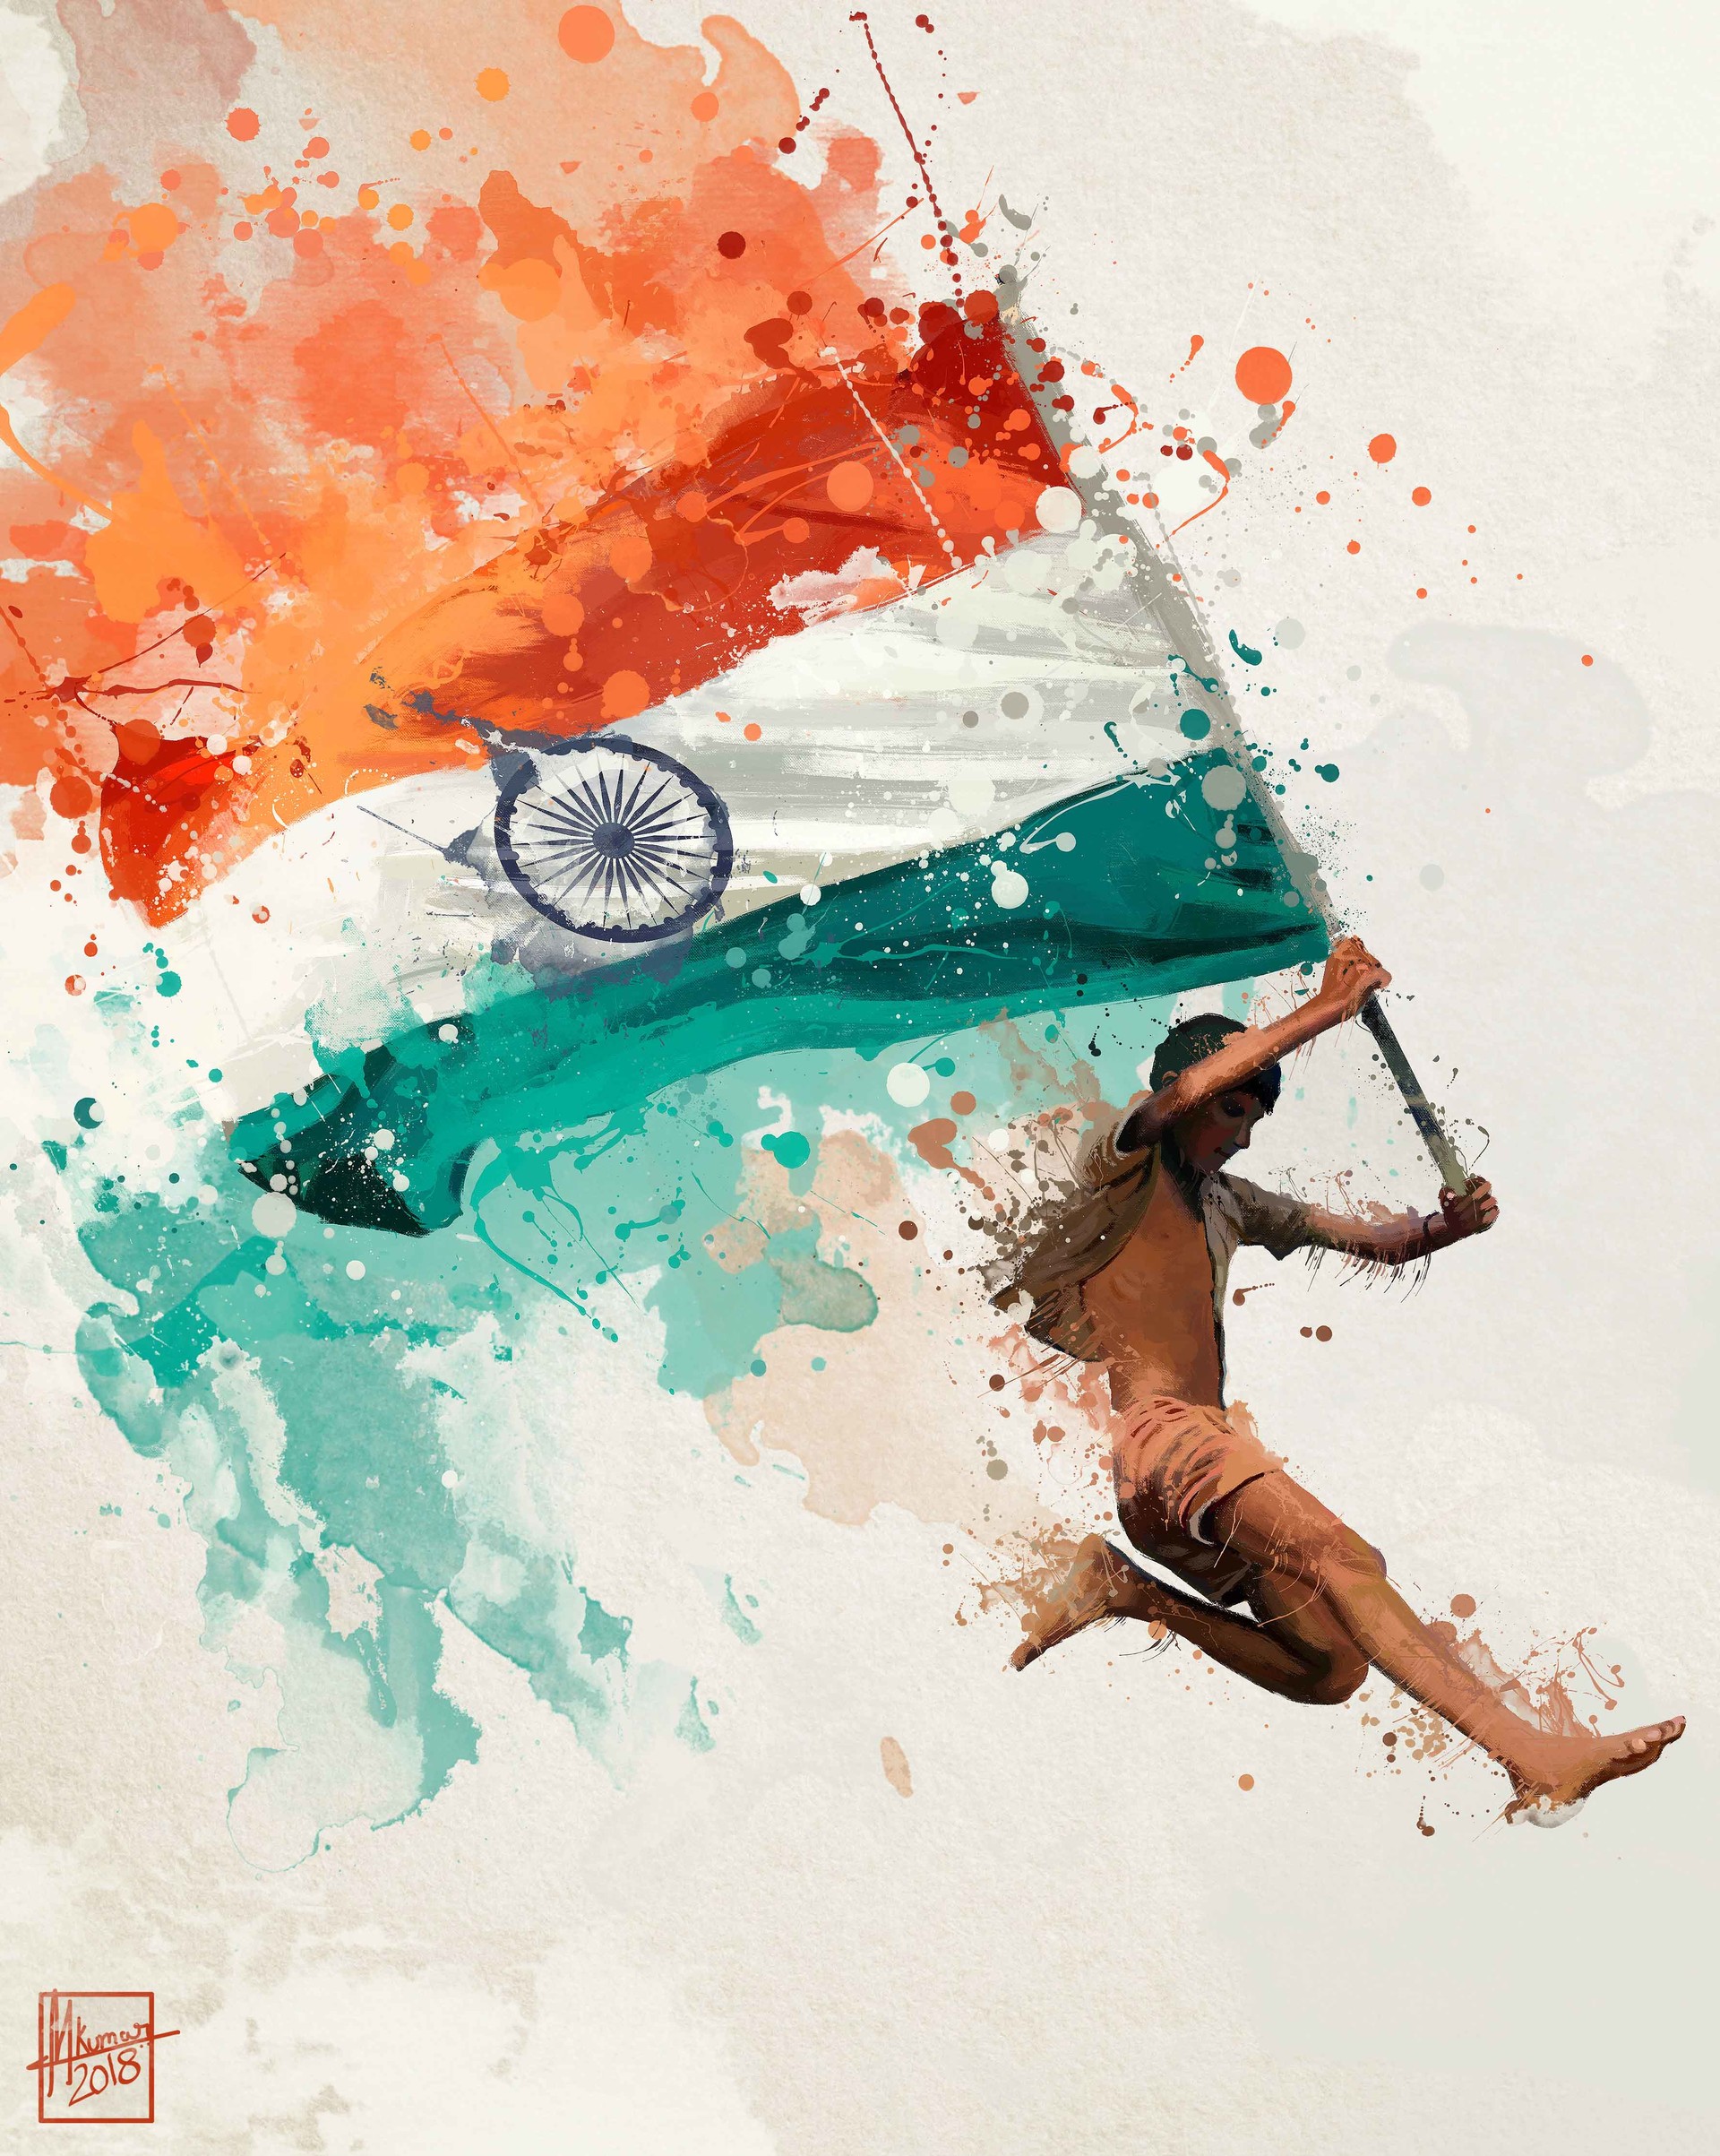 1,861 India Independence Day Drawings Images, Stock Photos & Vectors |  Shutterstock